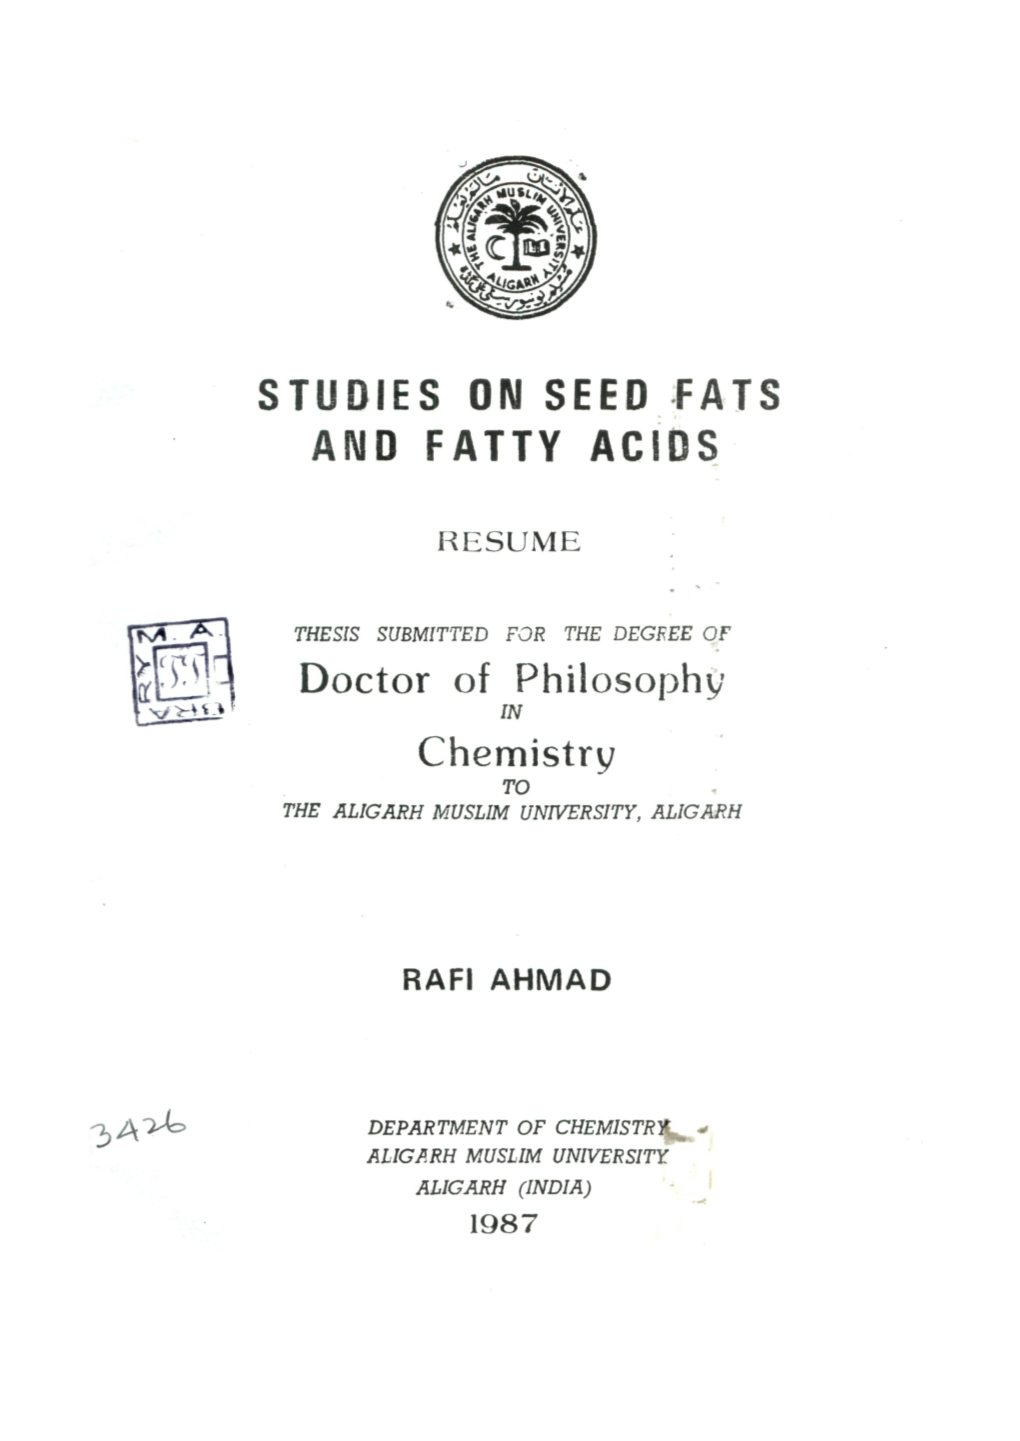 Studies on Seed Fats and Fatty Acids